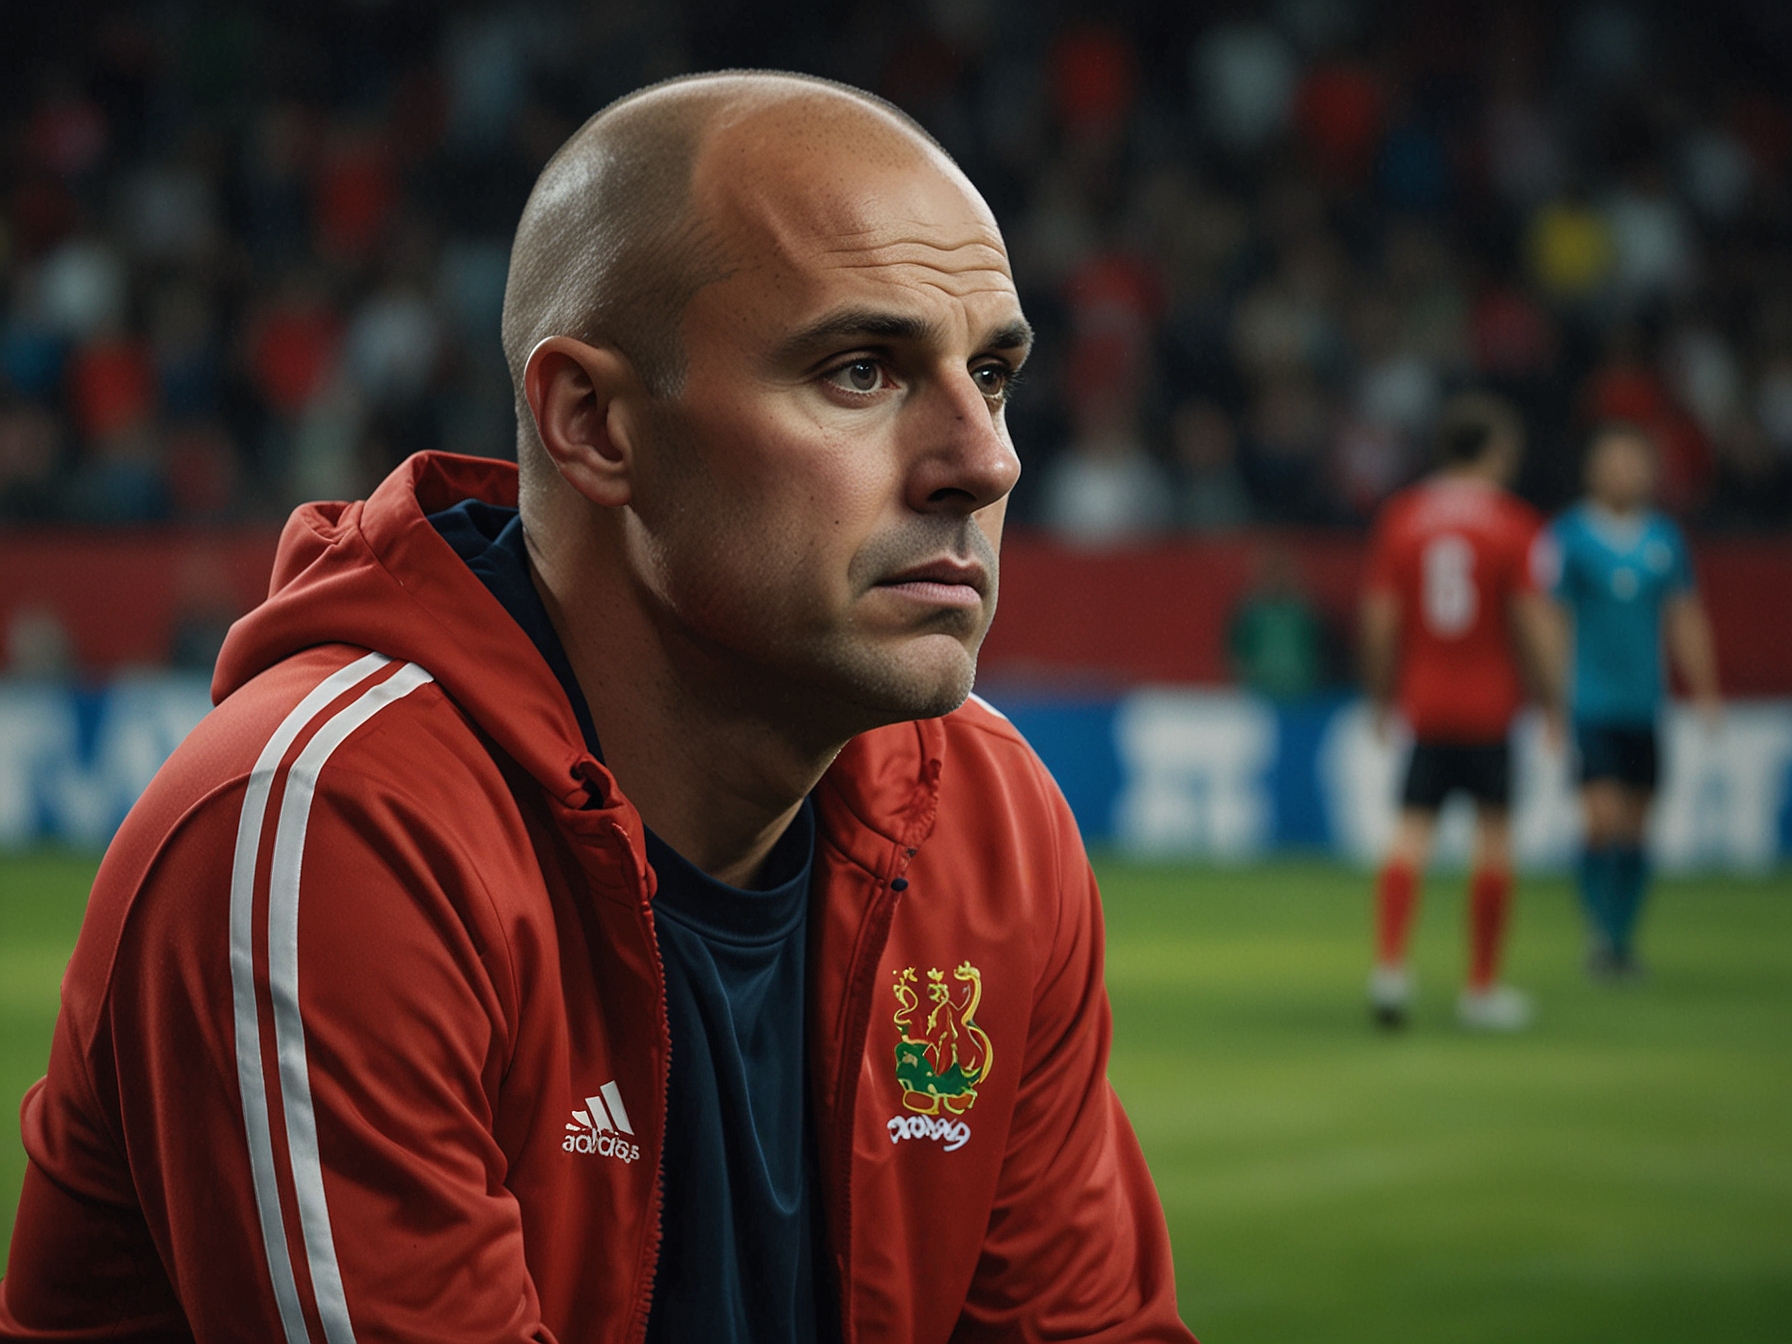 An image of a dejected Rob Page on the sidelines, captured during one of Wales' crucial qualifying matches for Euro 2024. His expression reflects the frustration and challenges faced during his tenure.